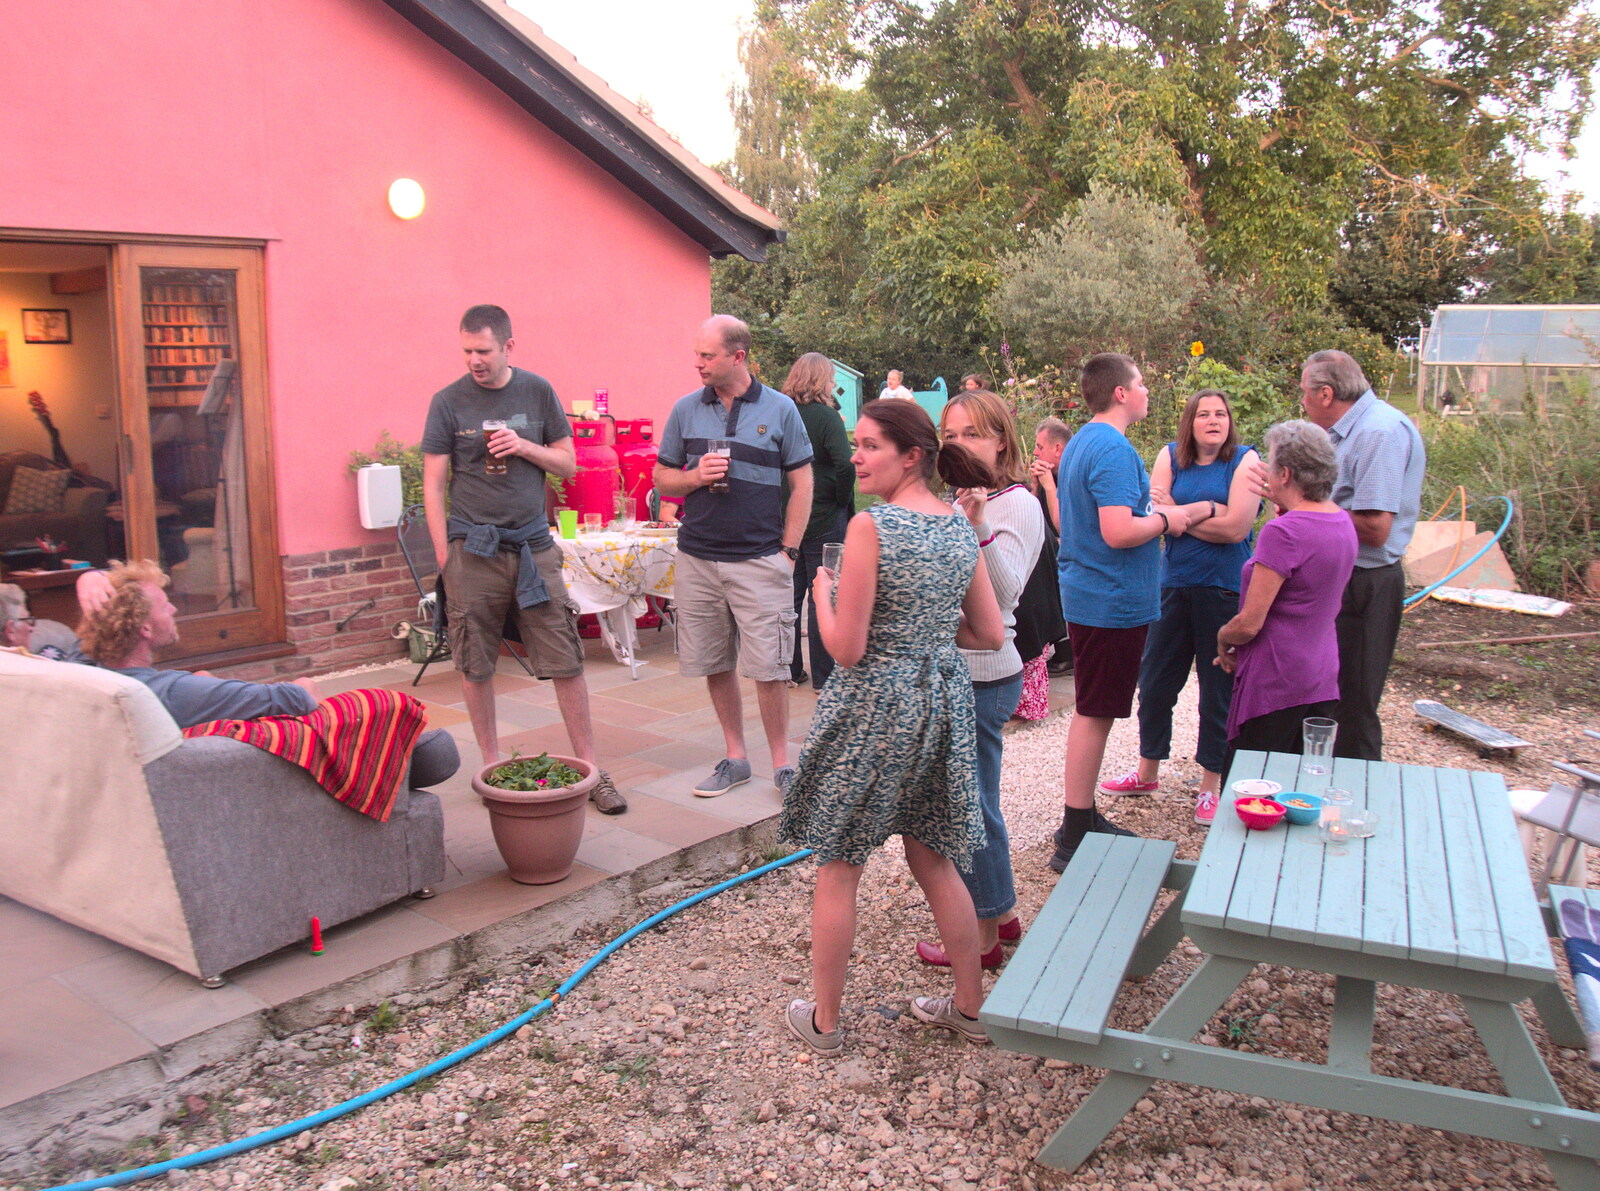 Guests mingle around from A Summer Party, Brome, Suffolk - 18th August 2018